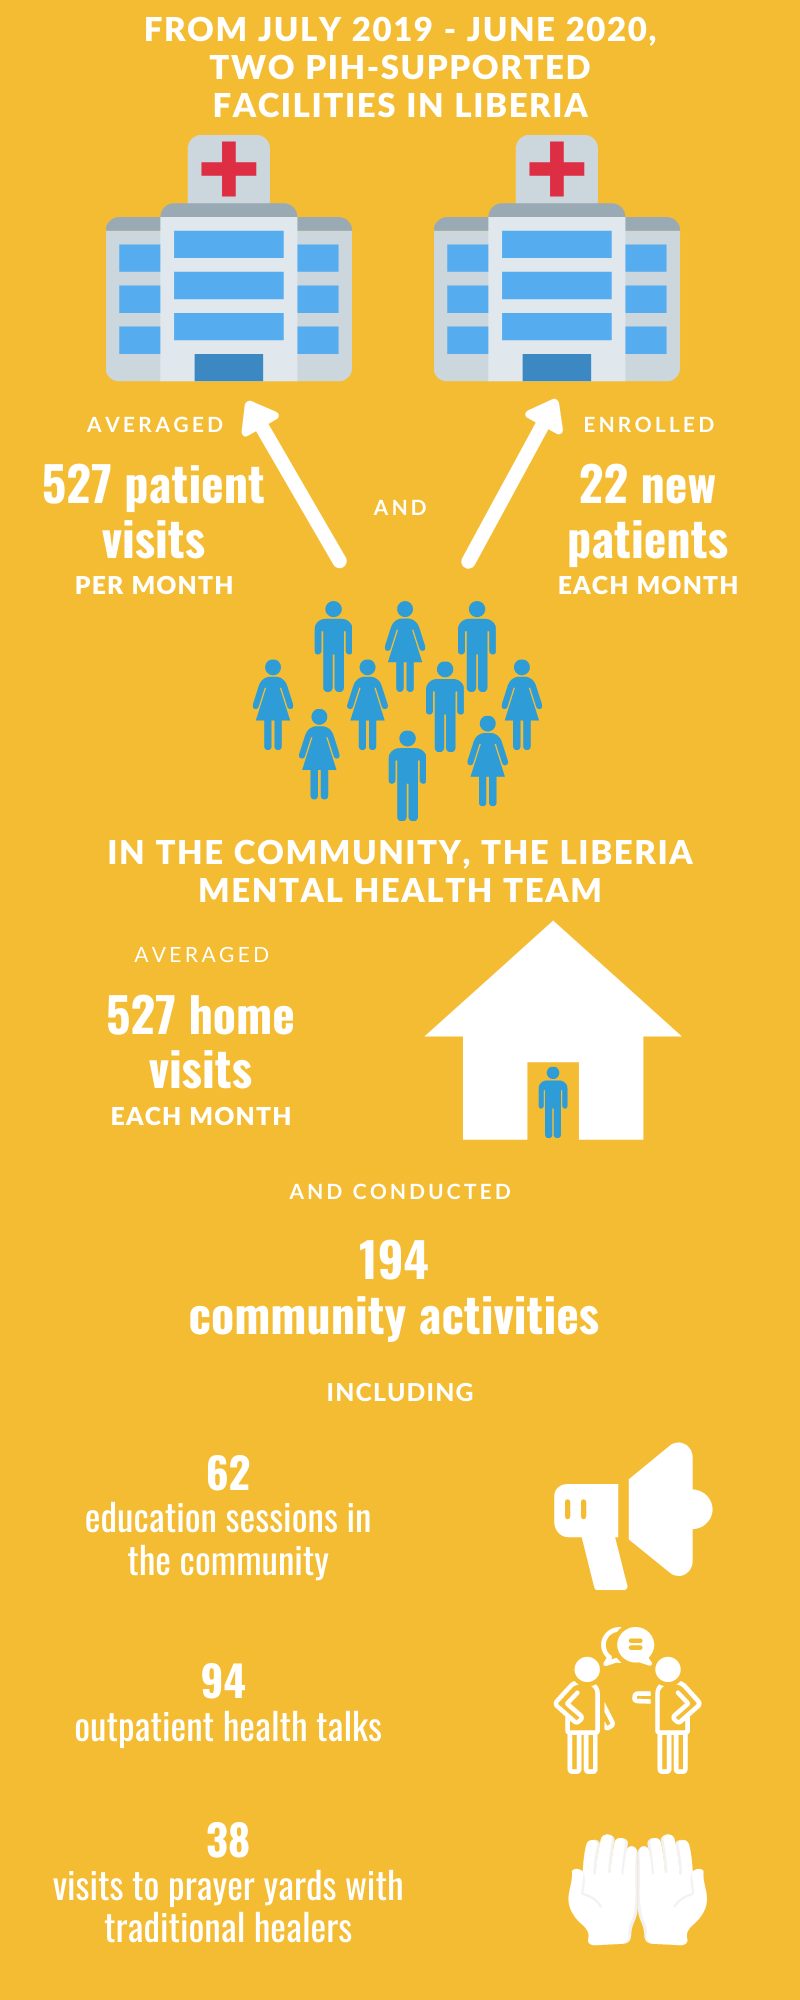 PIH Liberia's mental health team hosted nearly 200 community activities last year